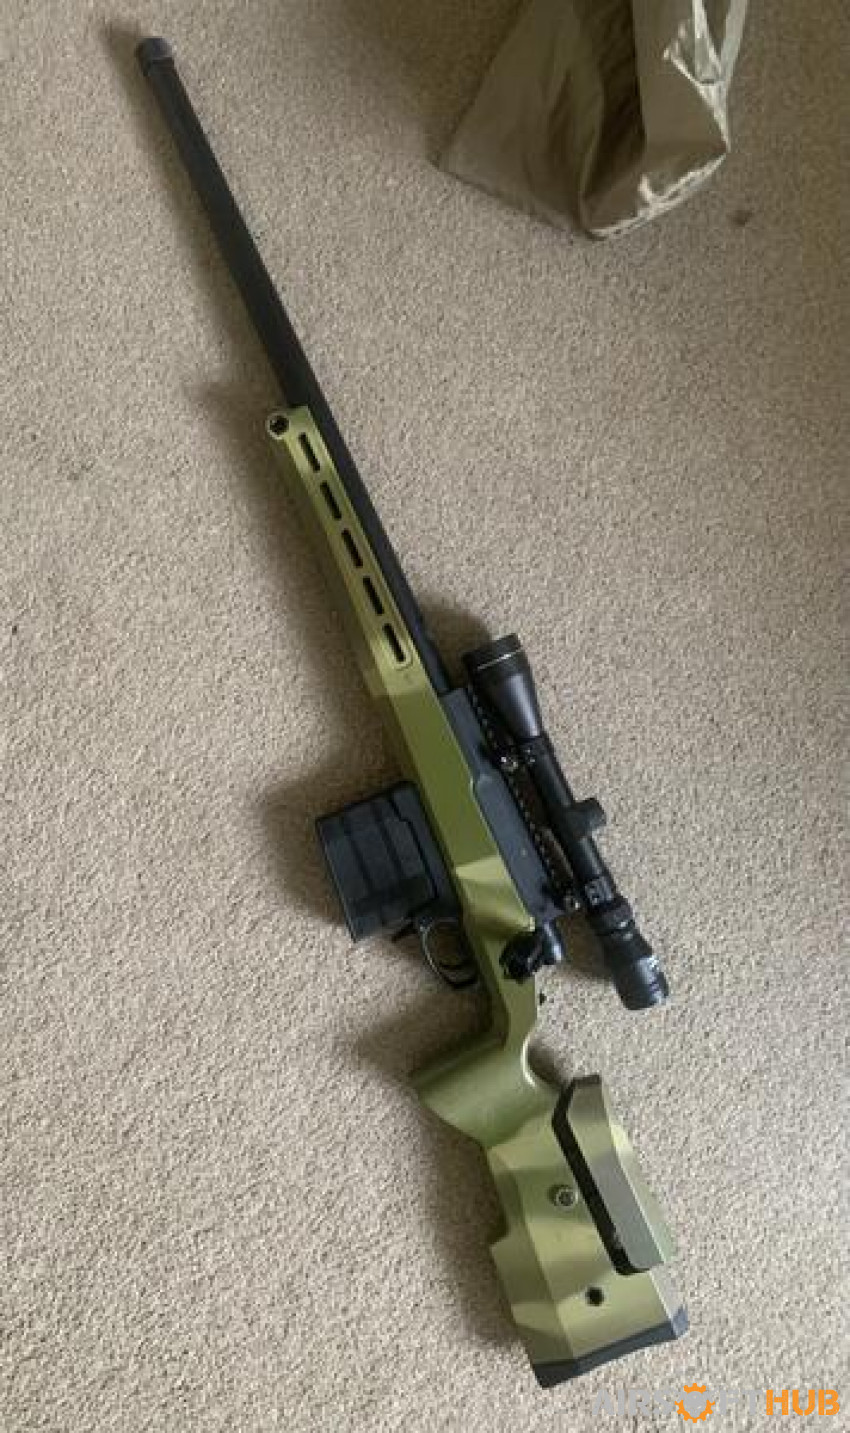 Silverback Tac-41P - Used airsoft equipment